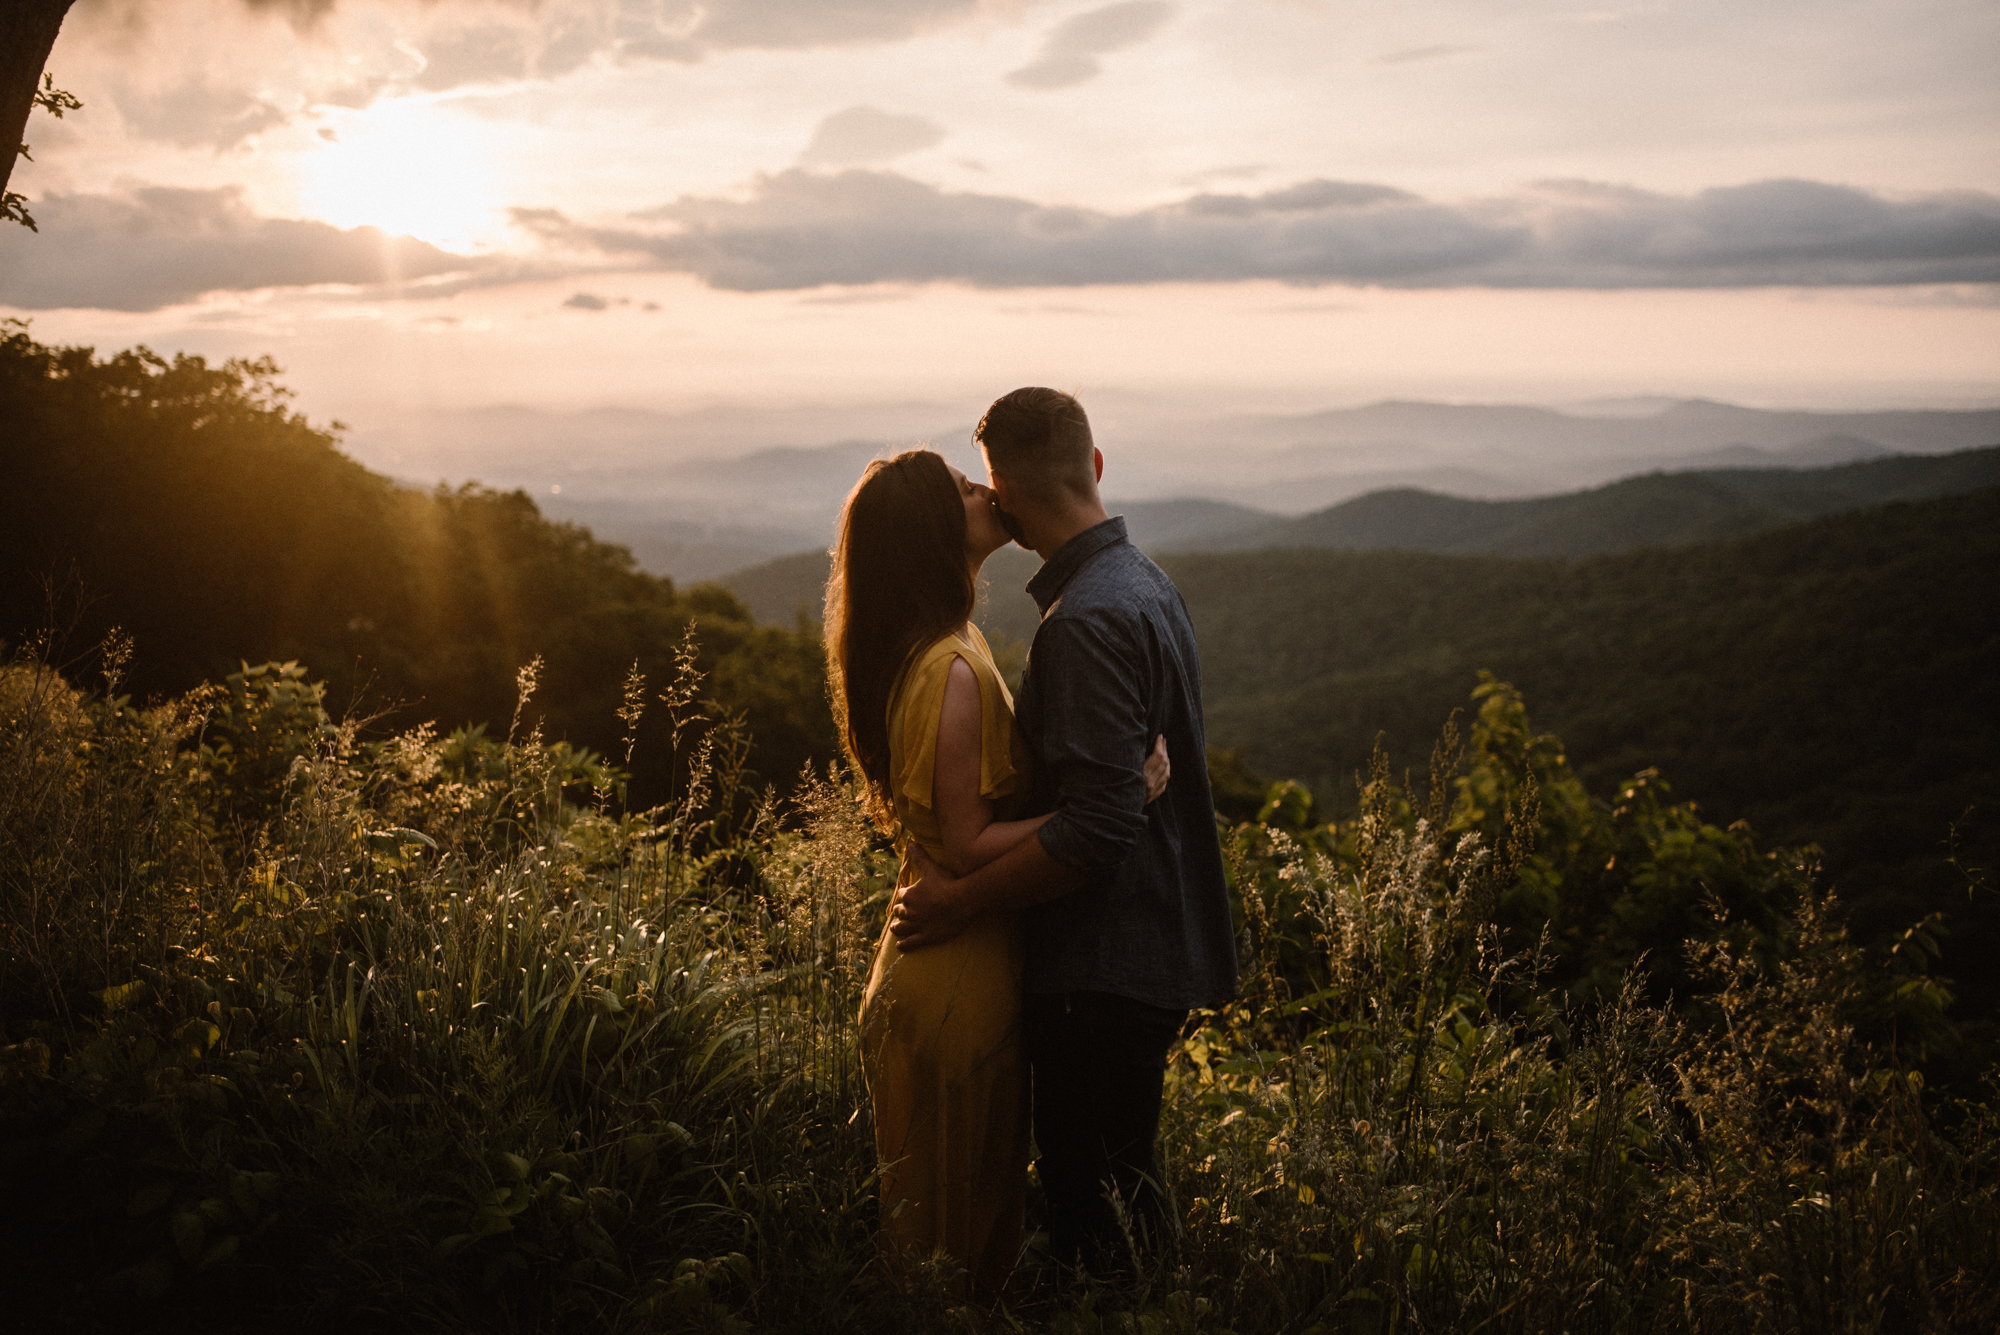 Camryn and Larry Sunrise Engagement Session in Shenandoah National Park - Things to Do in Luray Virginia - Adventurous Couple Photo Shoot White Sails Creative_13.jpg